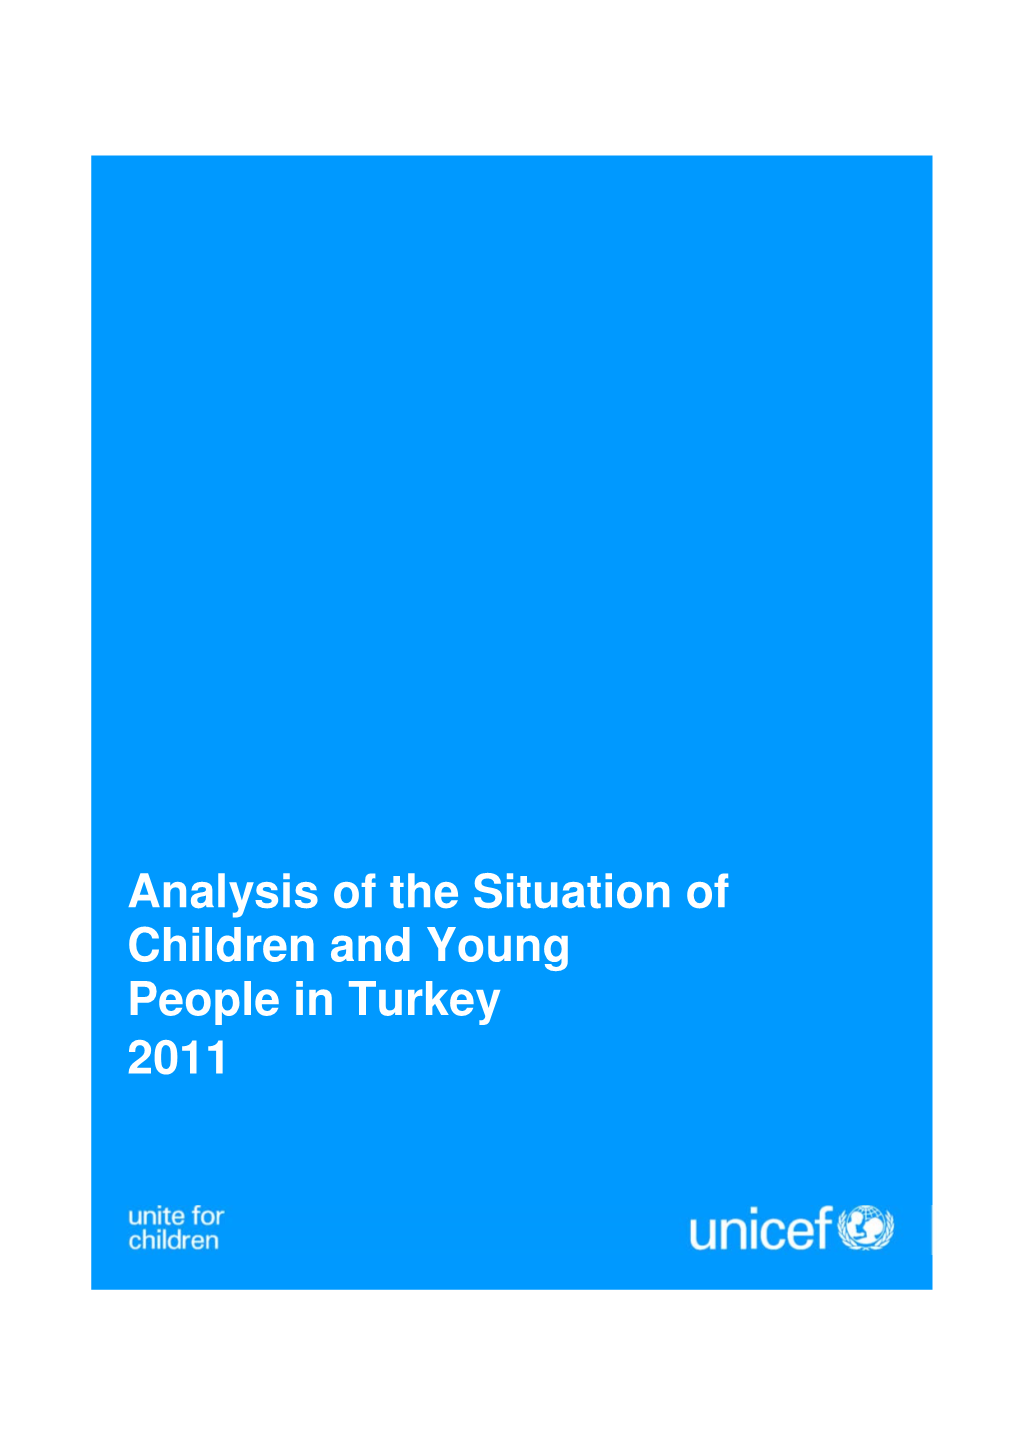 Analysis of the Situation of Children and Young People in Turkey 2011